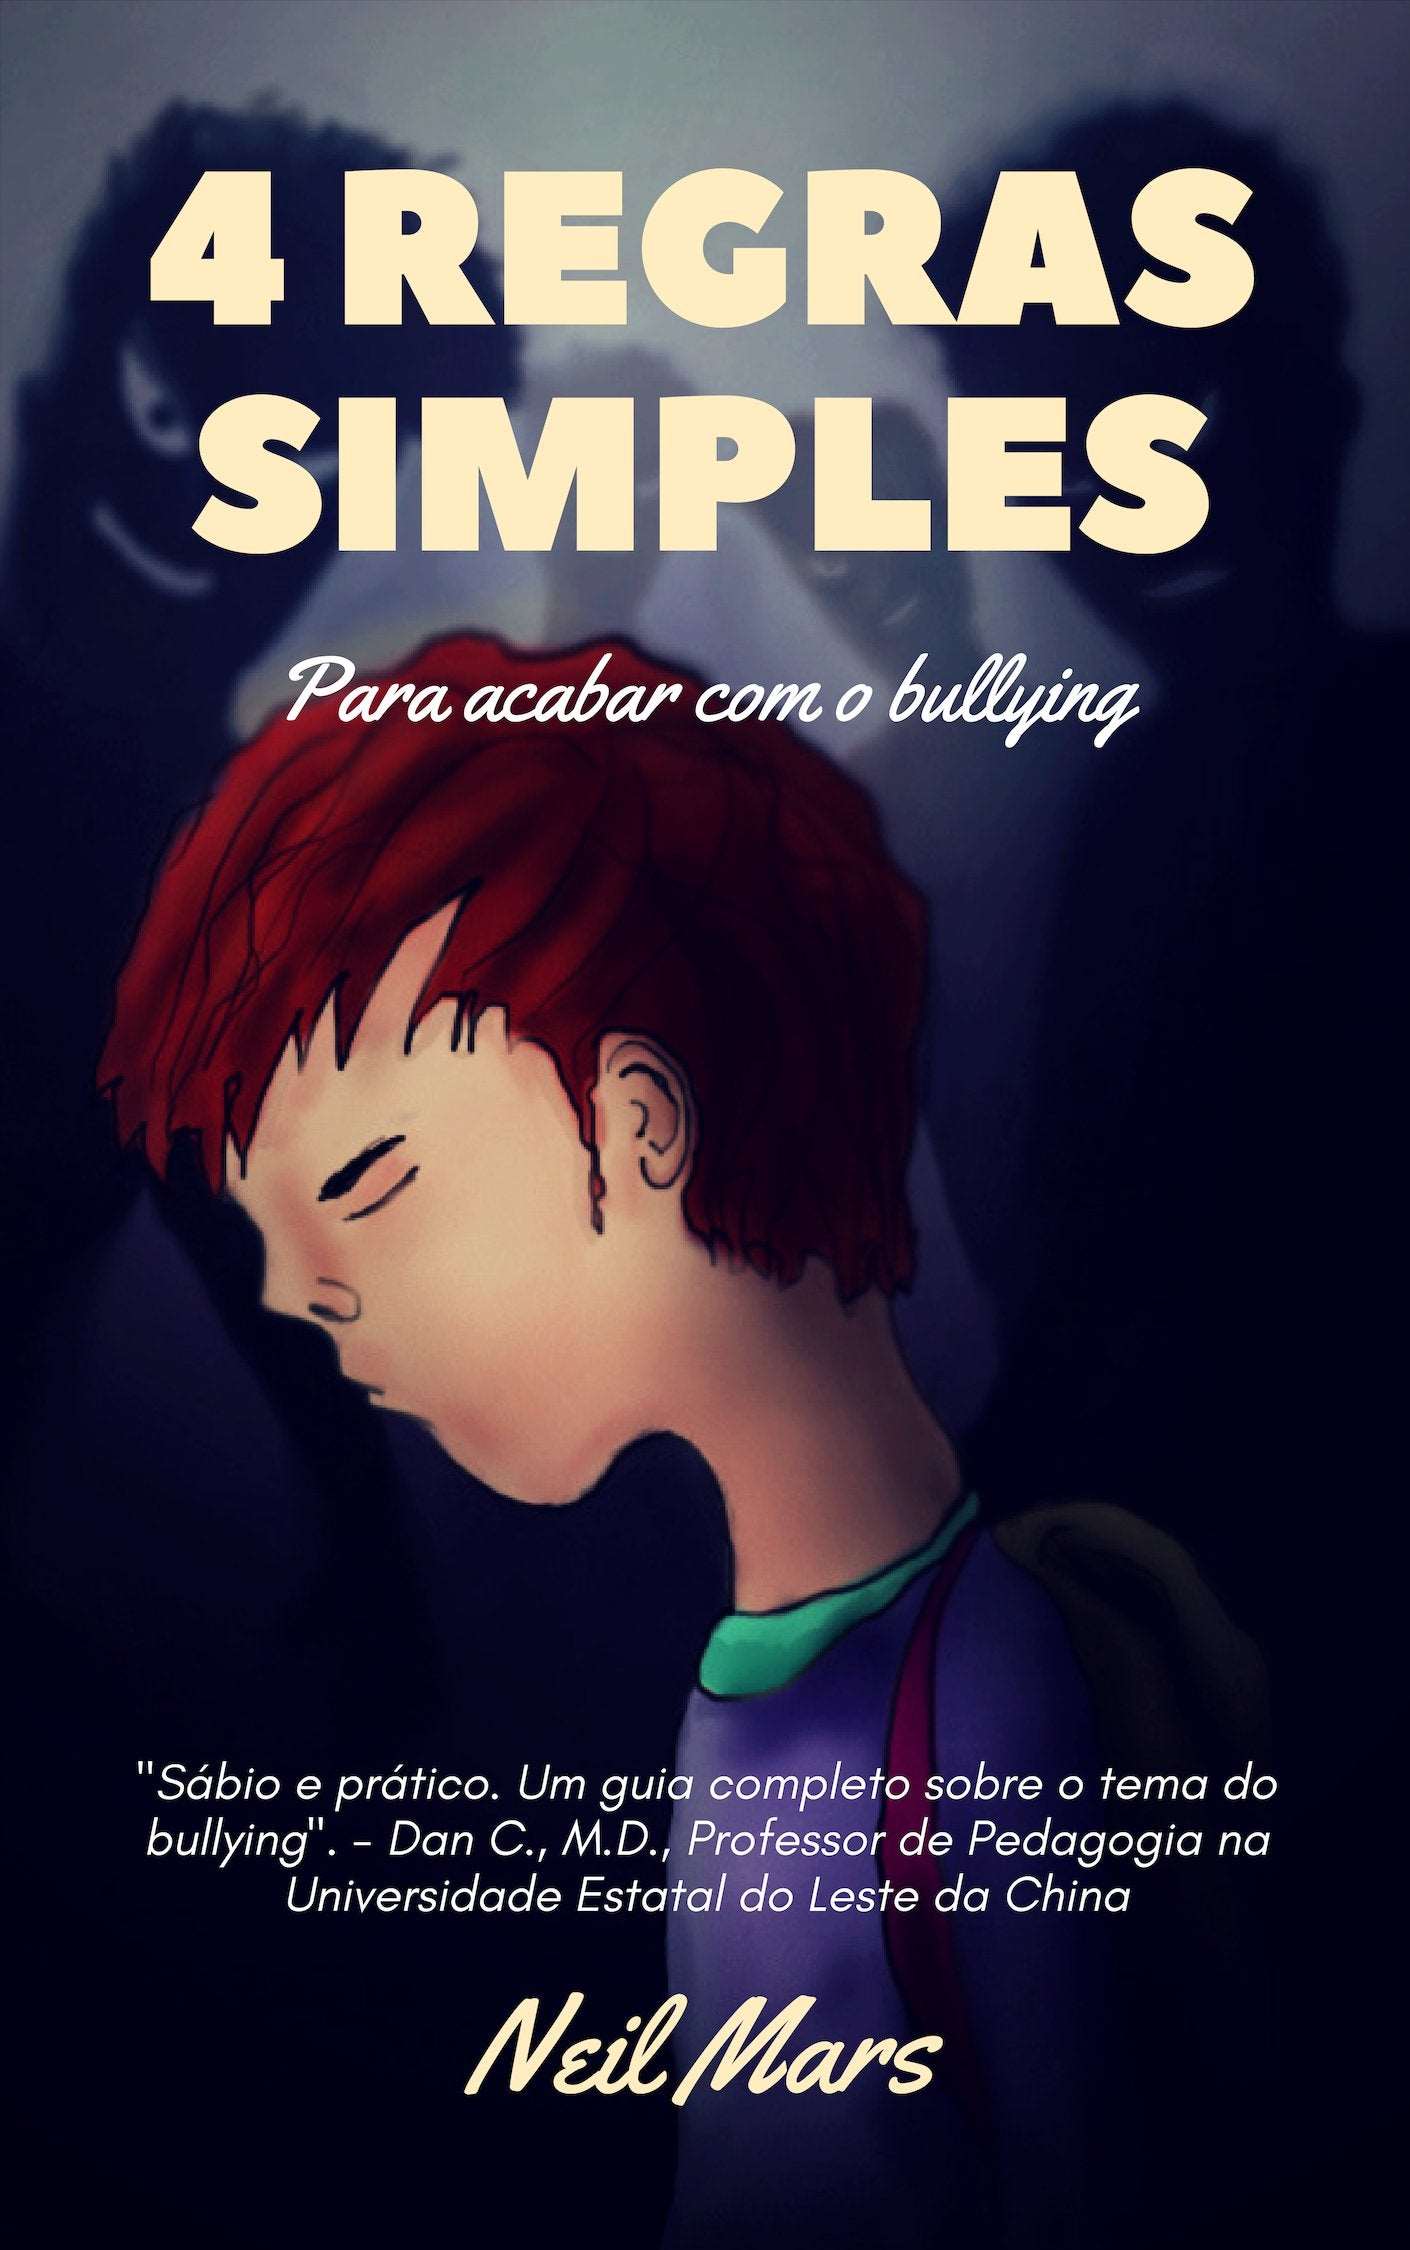 4 Simple Rules to Stop Bullying Portuguese